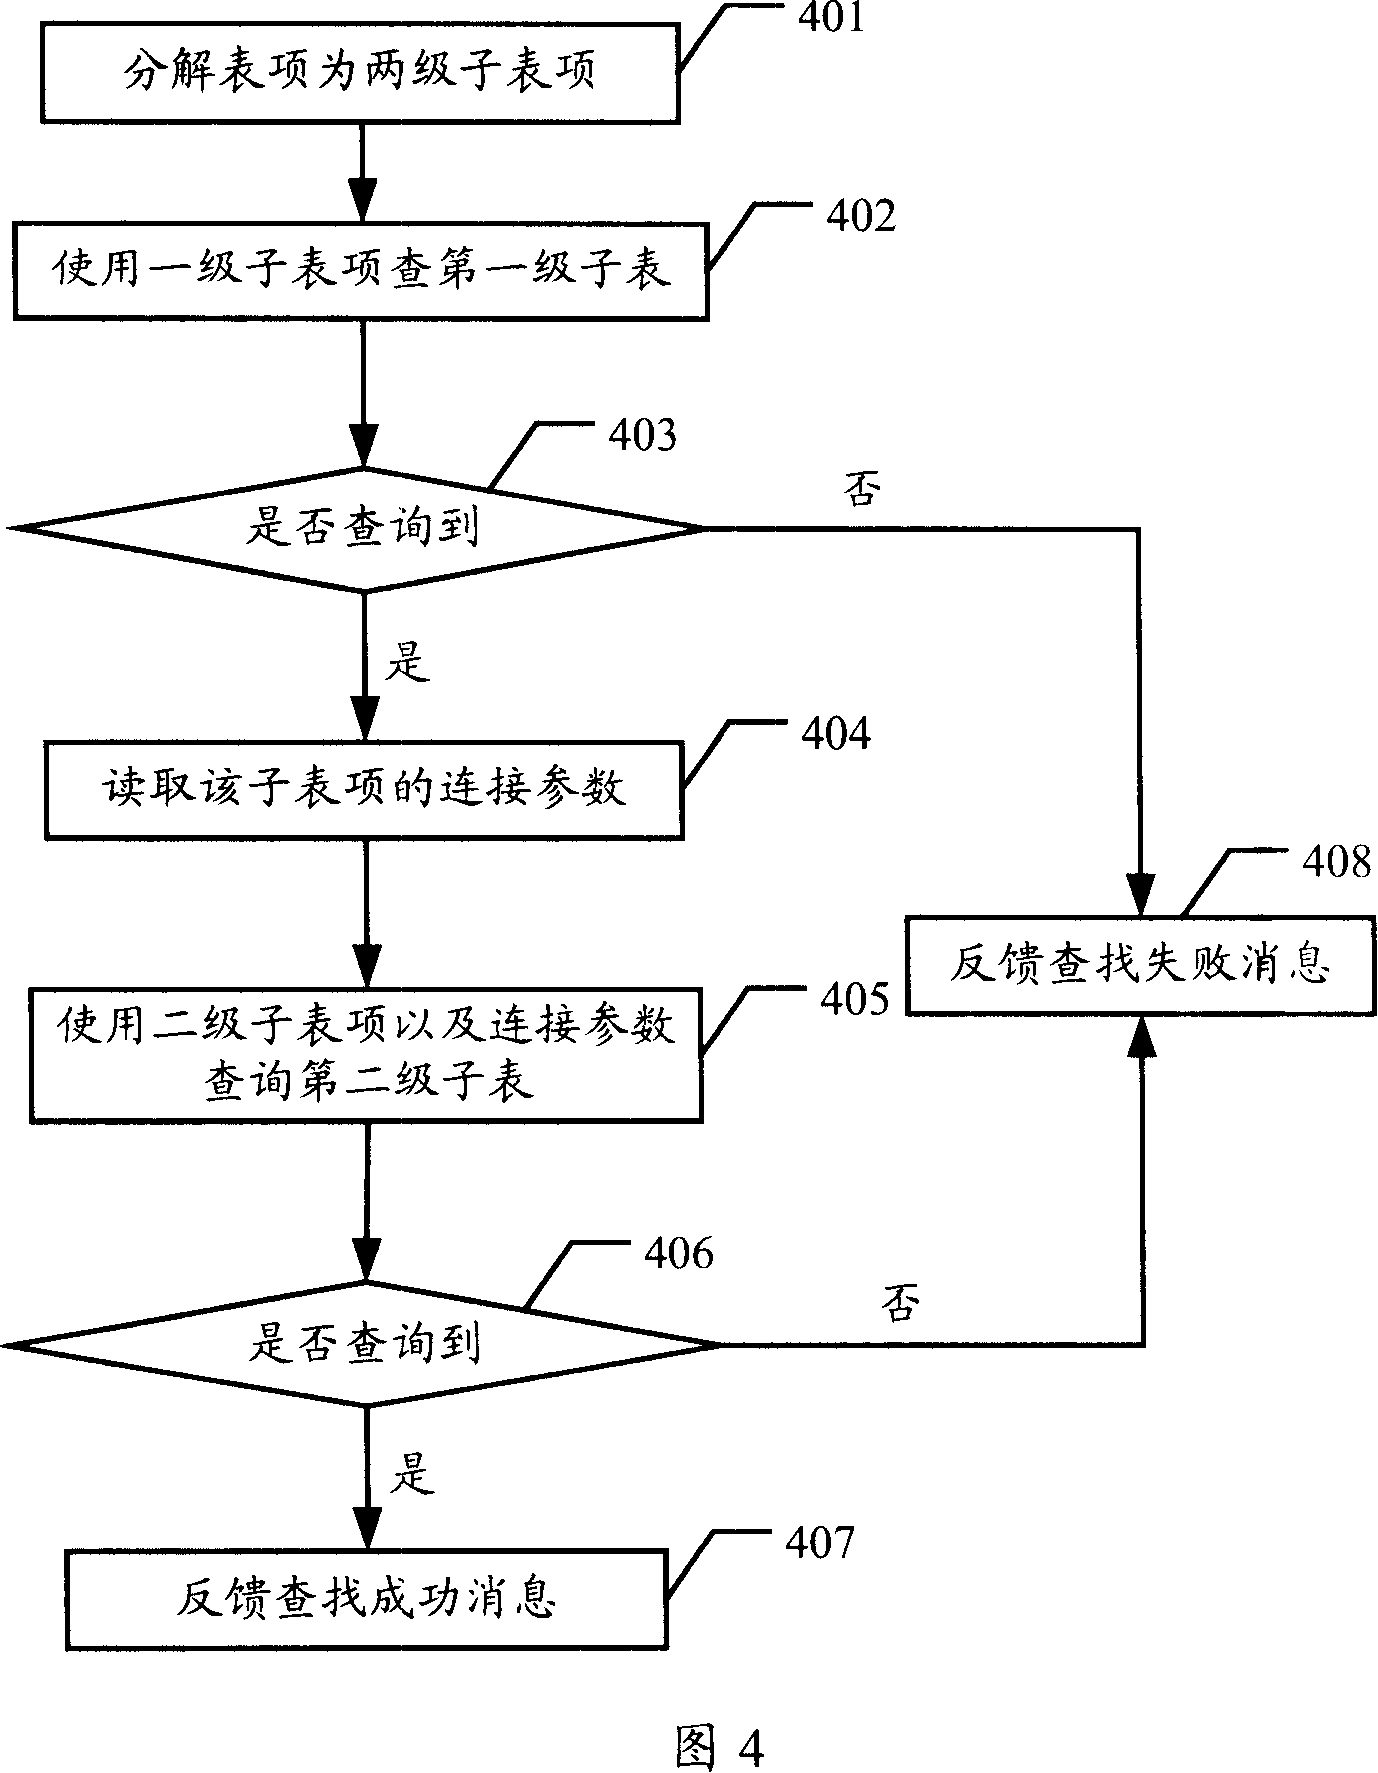 Data storing method and device, and data seeking, adding and deleting method